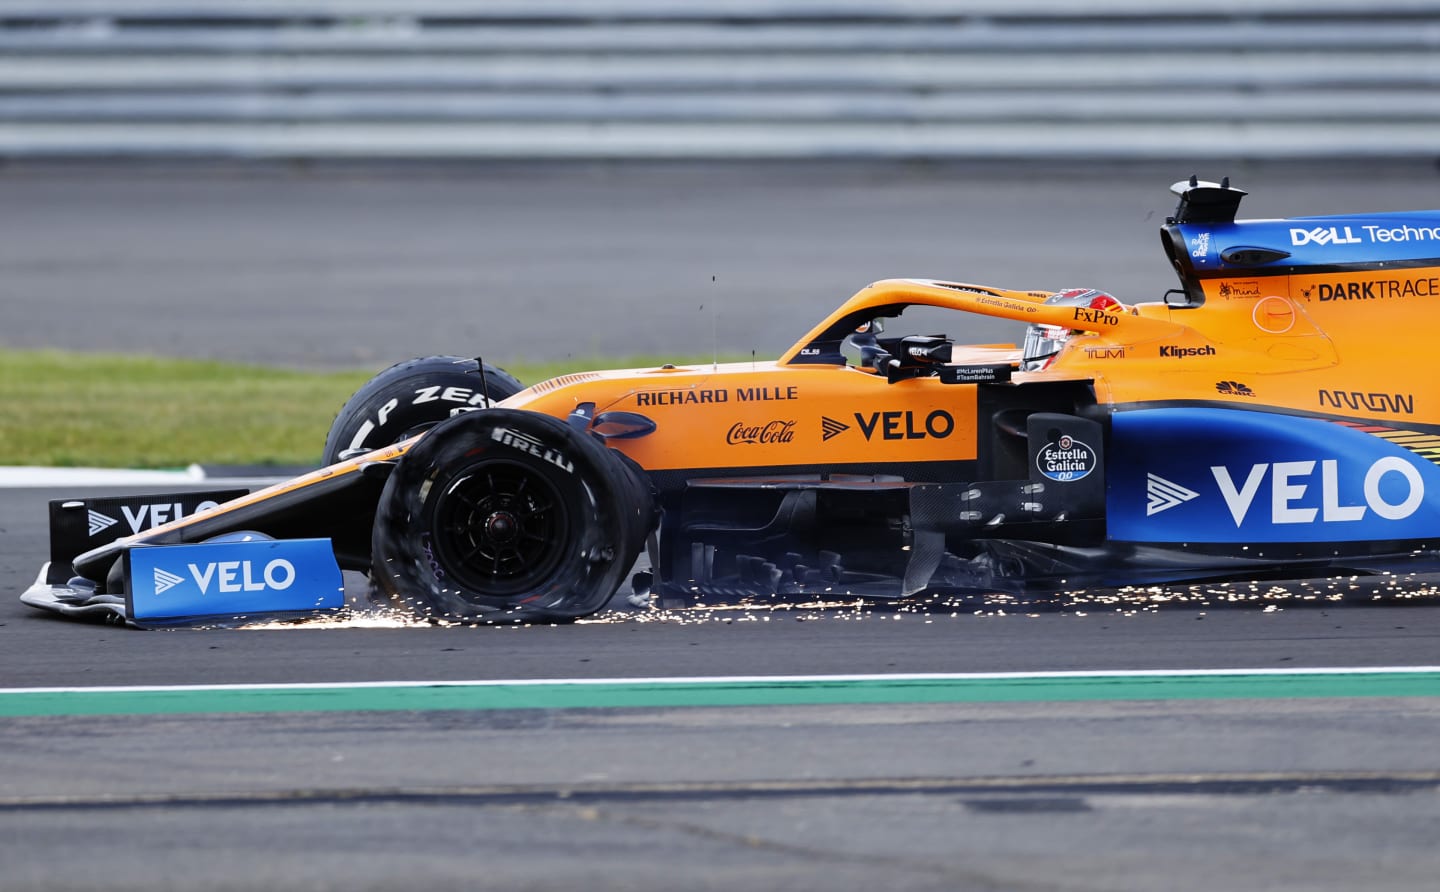 NORTHAMPTON, ENGLAND - AUGUST 02: Carlos Sainz of Spain driving the (55) McLaren F1 Team MCL35 Renault on track with a punctured tyre during the F1 Grand Prix of Great Britain at Silverstone on August 02, 2020 in Northampton, England. (Photo by Andrew Boyers/Pool via Getty Images)